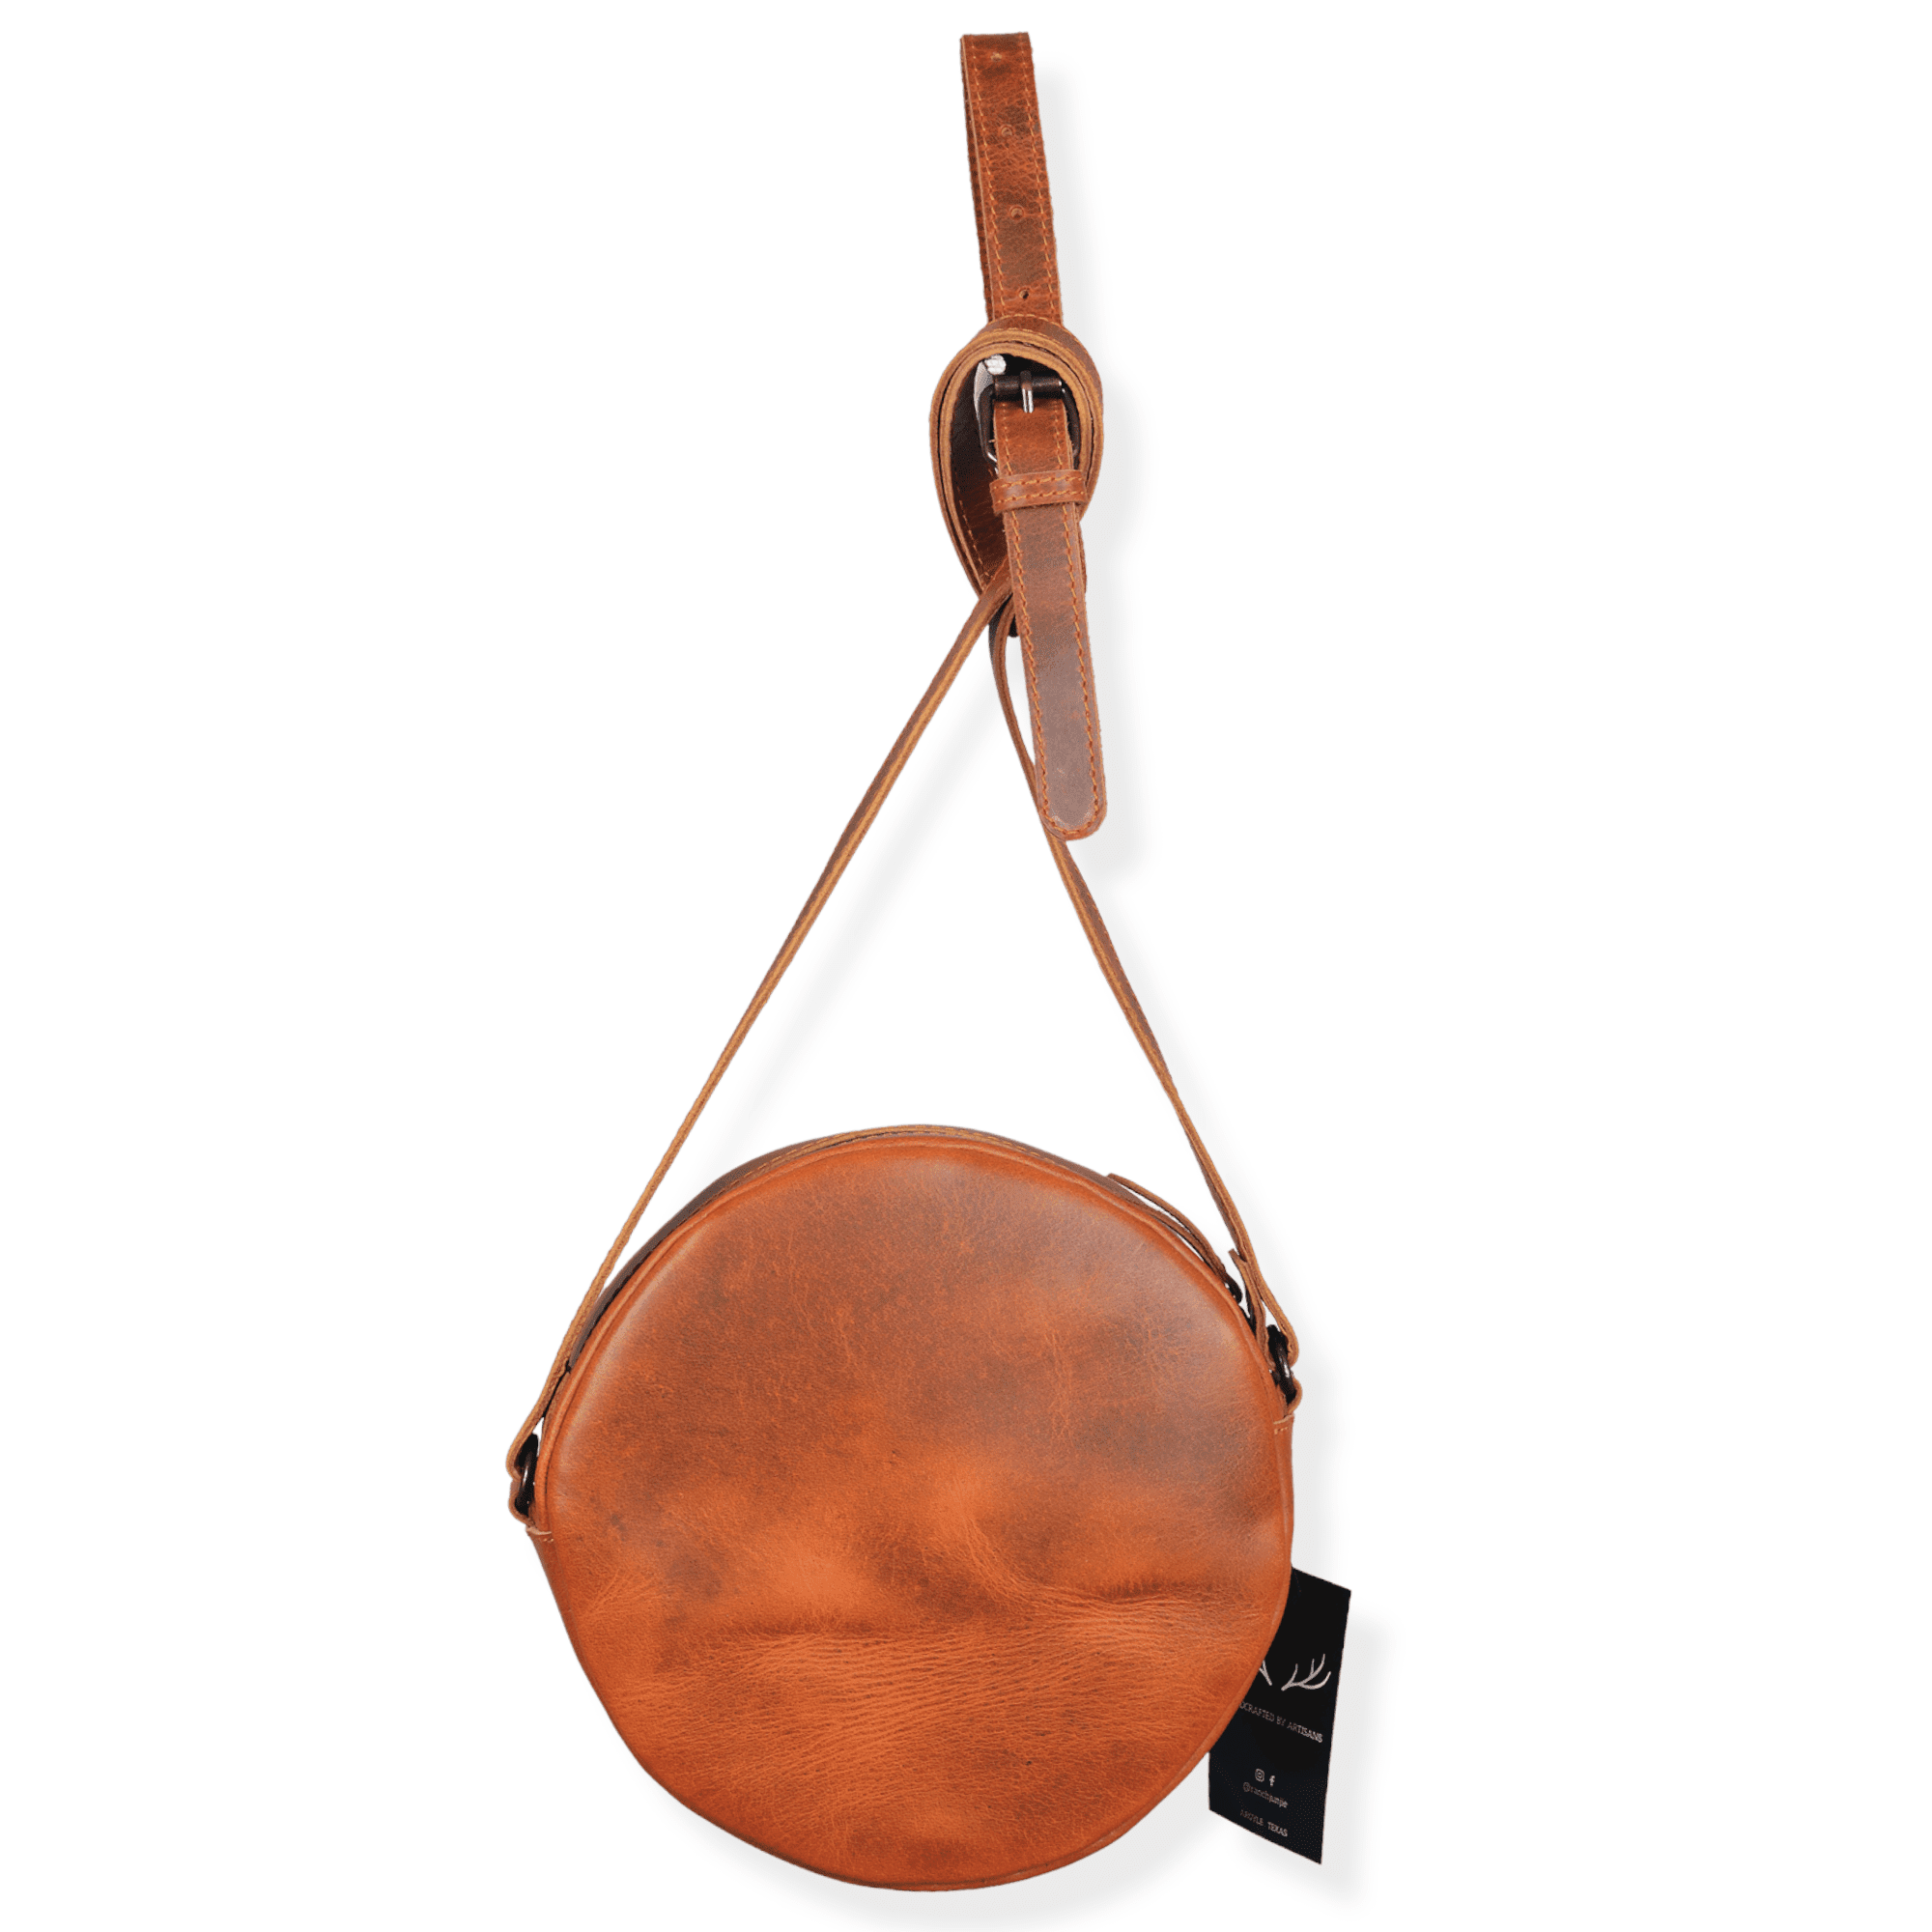 Buy Round Leather Bag, Small Shoulder Bag, Handmade in Italy Online in  India - Etsy